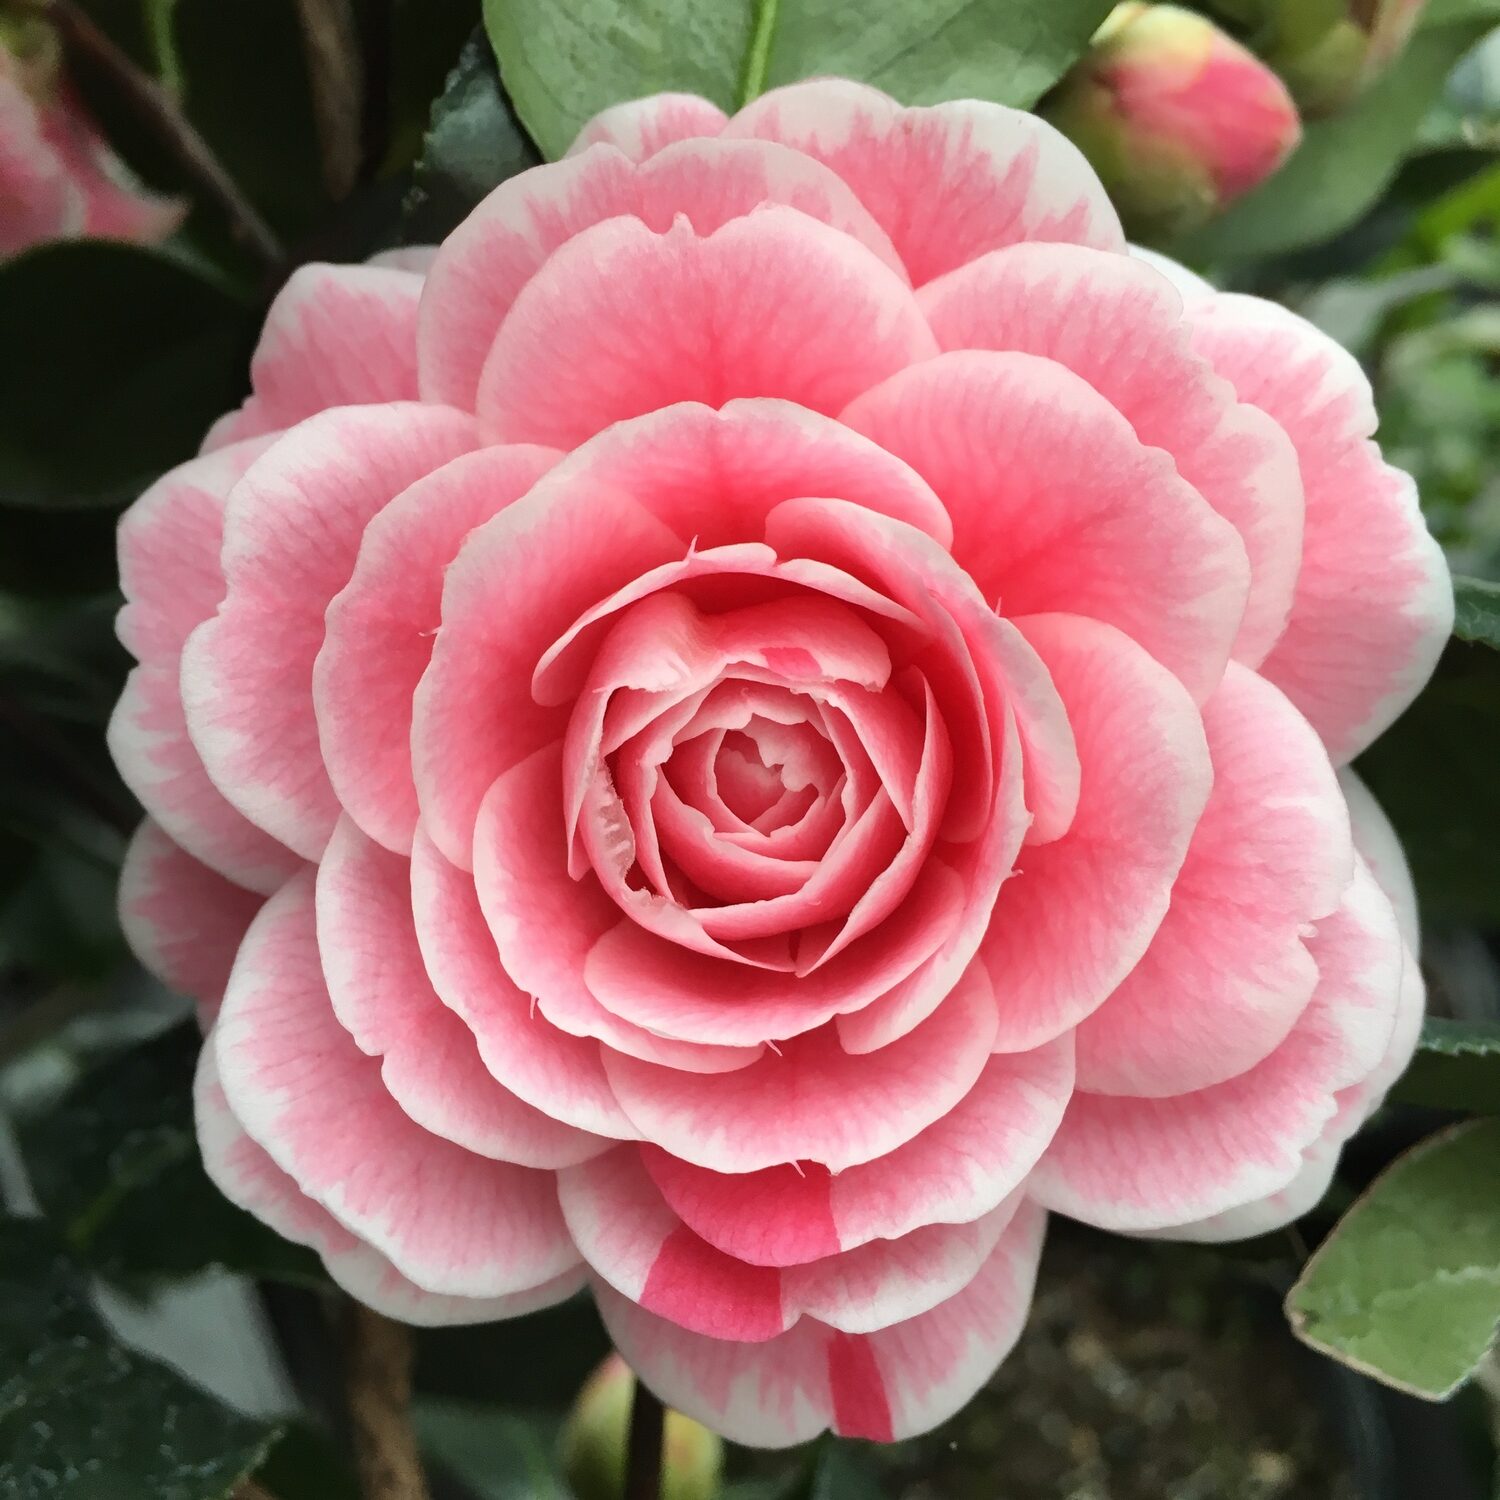 April Dawn Blush is a japonica type with a light pink, 3-to-4-inch double flower occasionally with dark pink stripes. Hardy to zone 6b, it’s well suited to protected East End gardens. CAMELLIA FOREST NURSERY